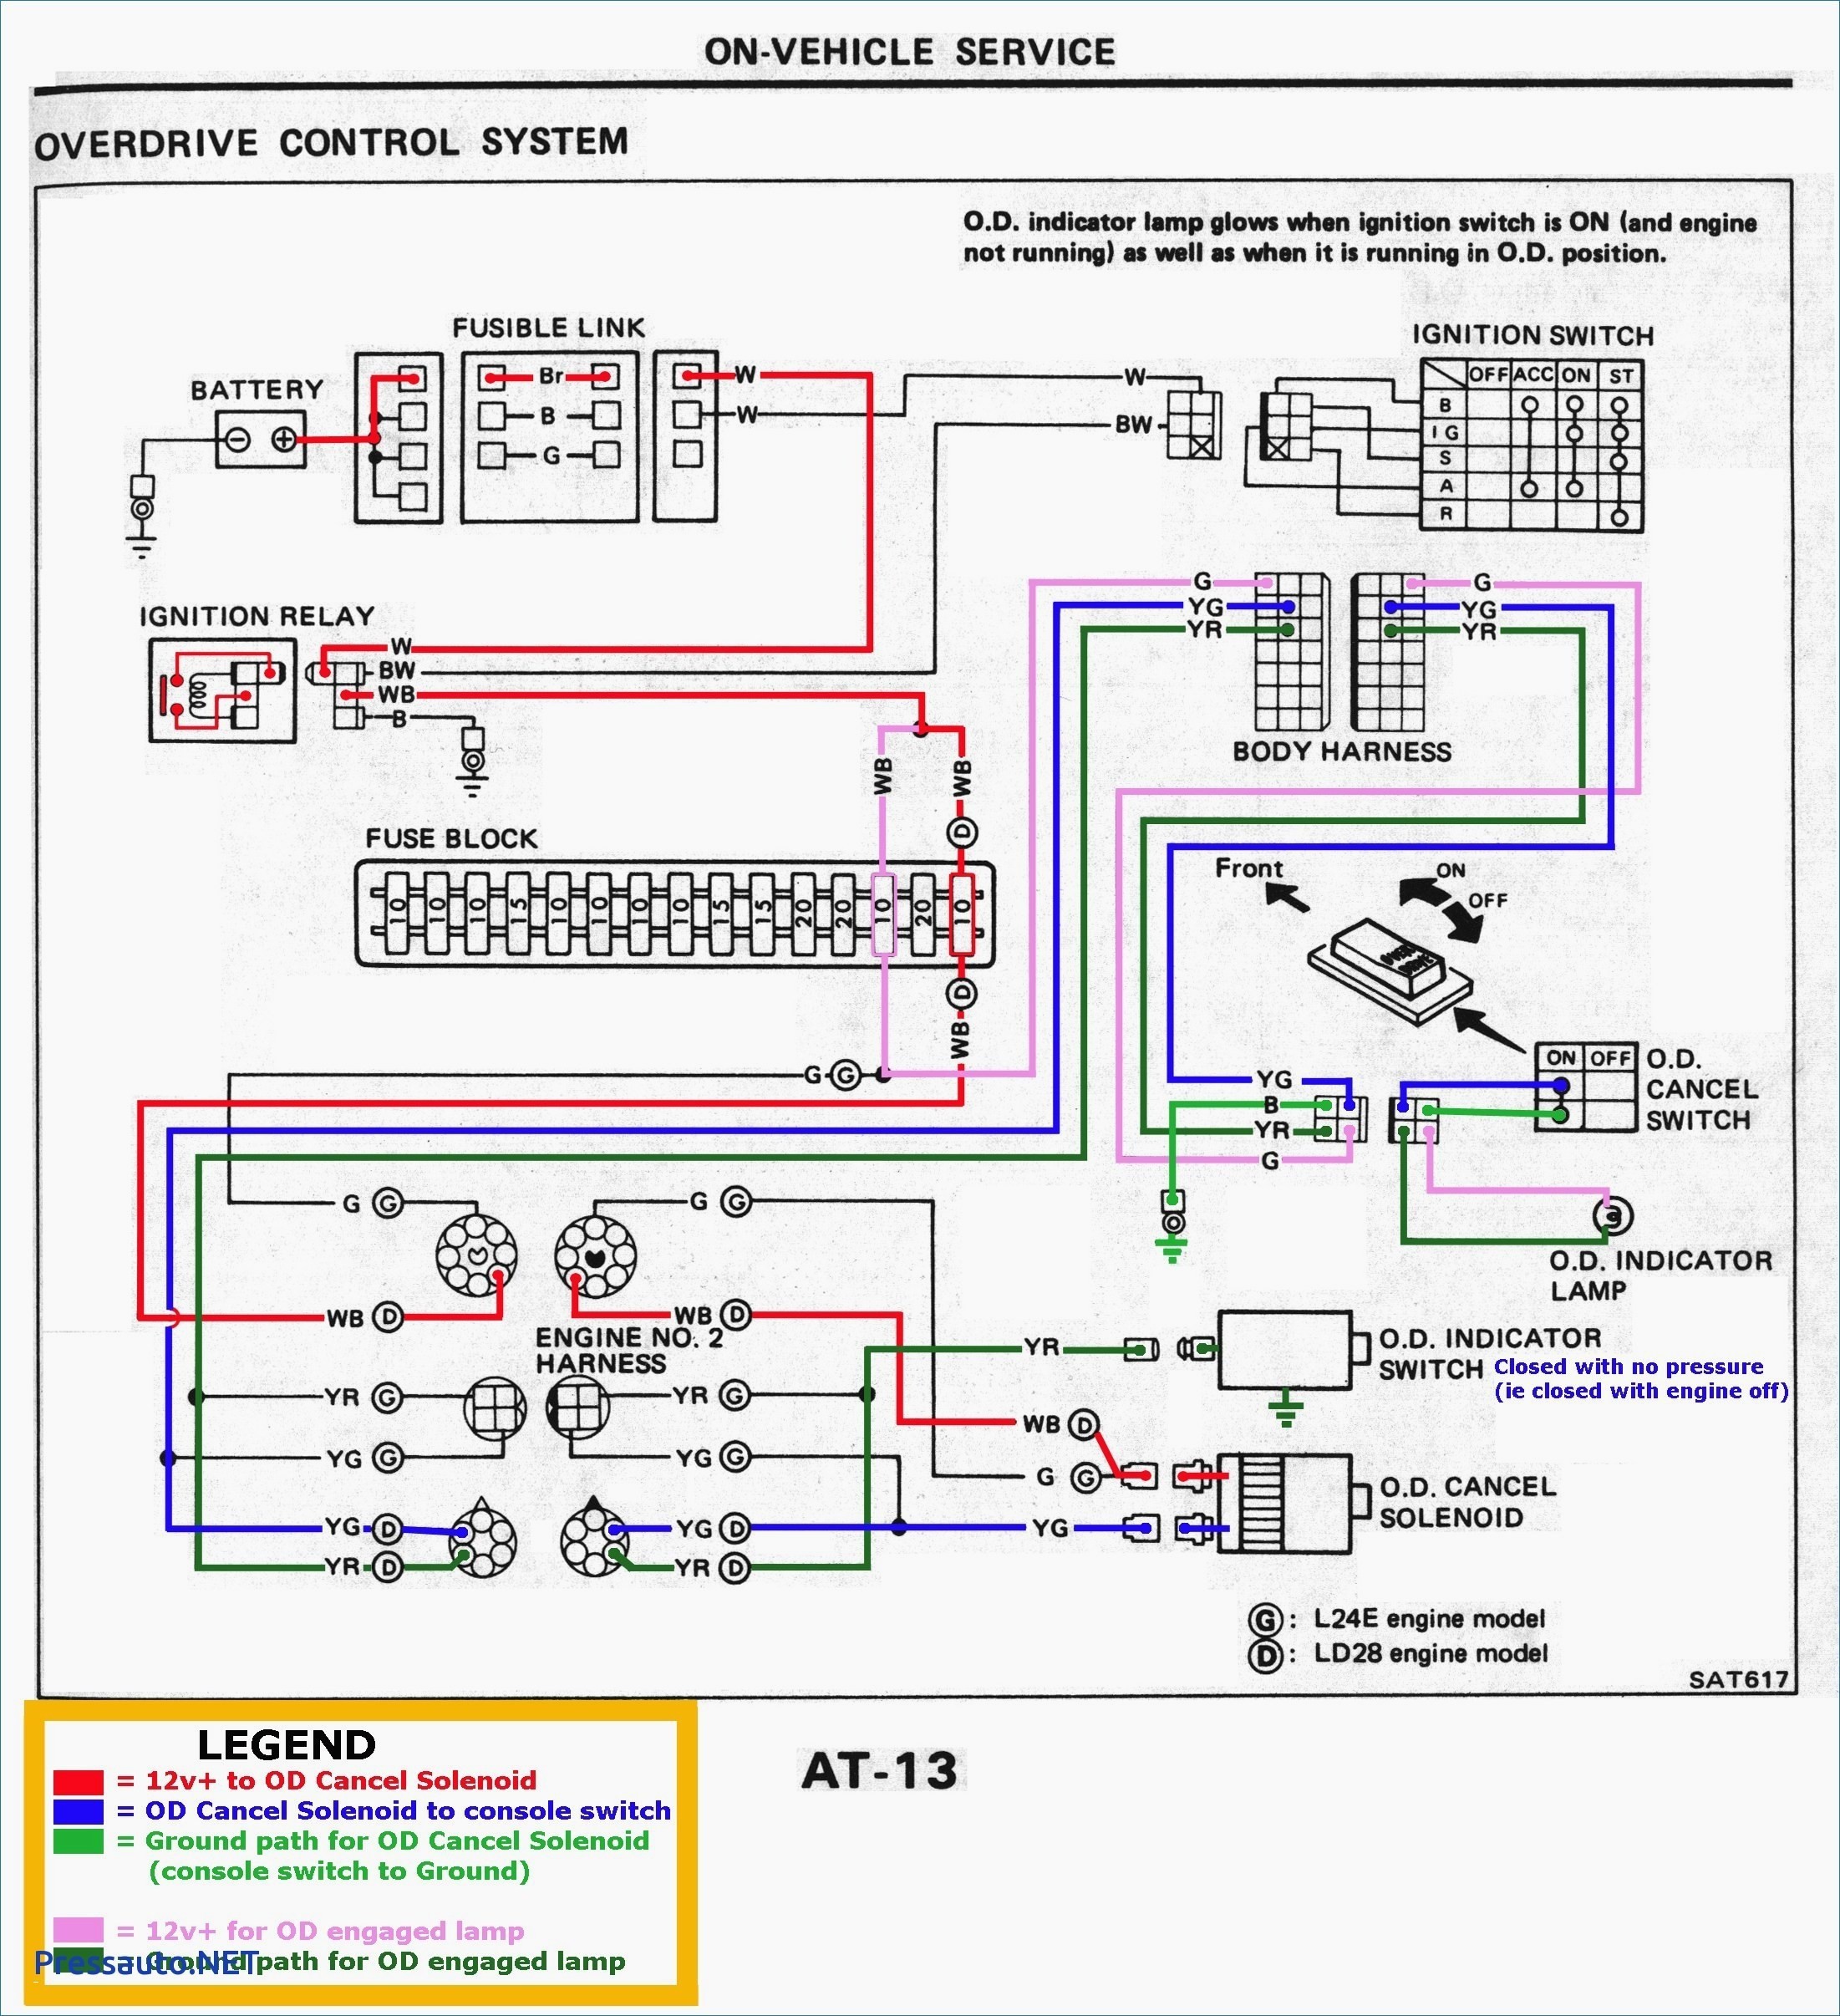 Wiring Diagram Light Relay Inspirationa Lawn Mower Ignition Switch Wiring Diagram Unique Od Wiring Diagram